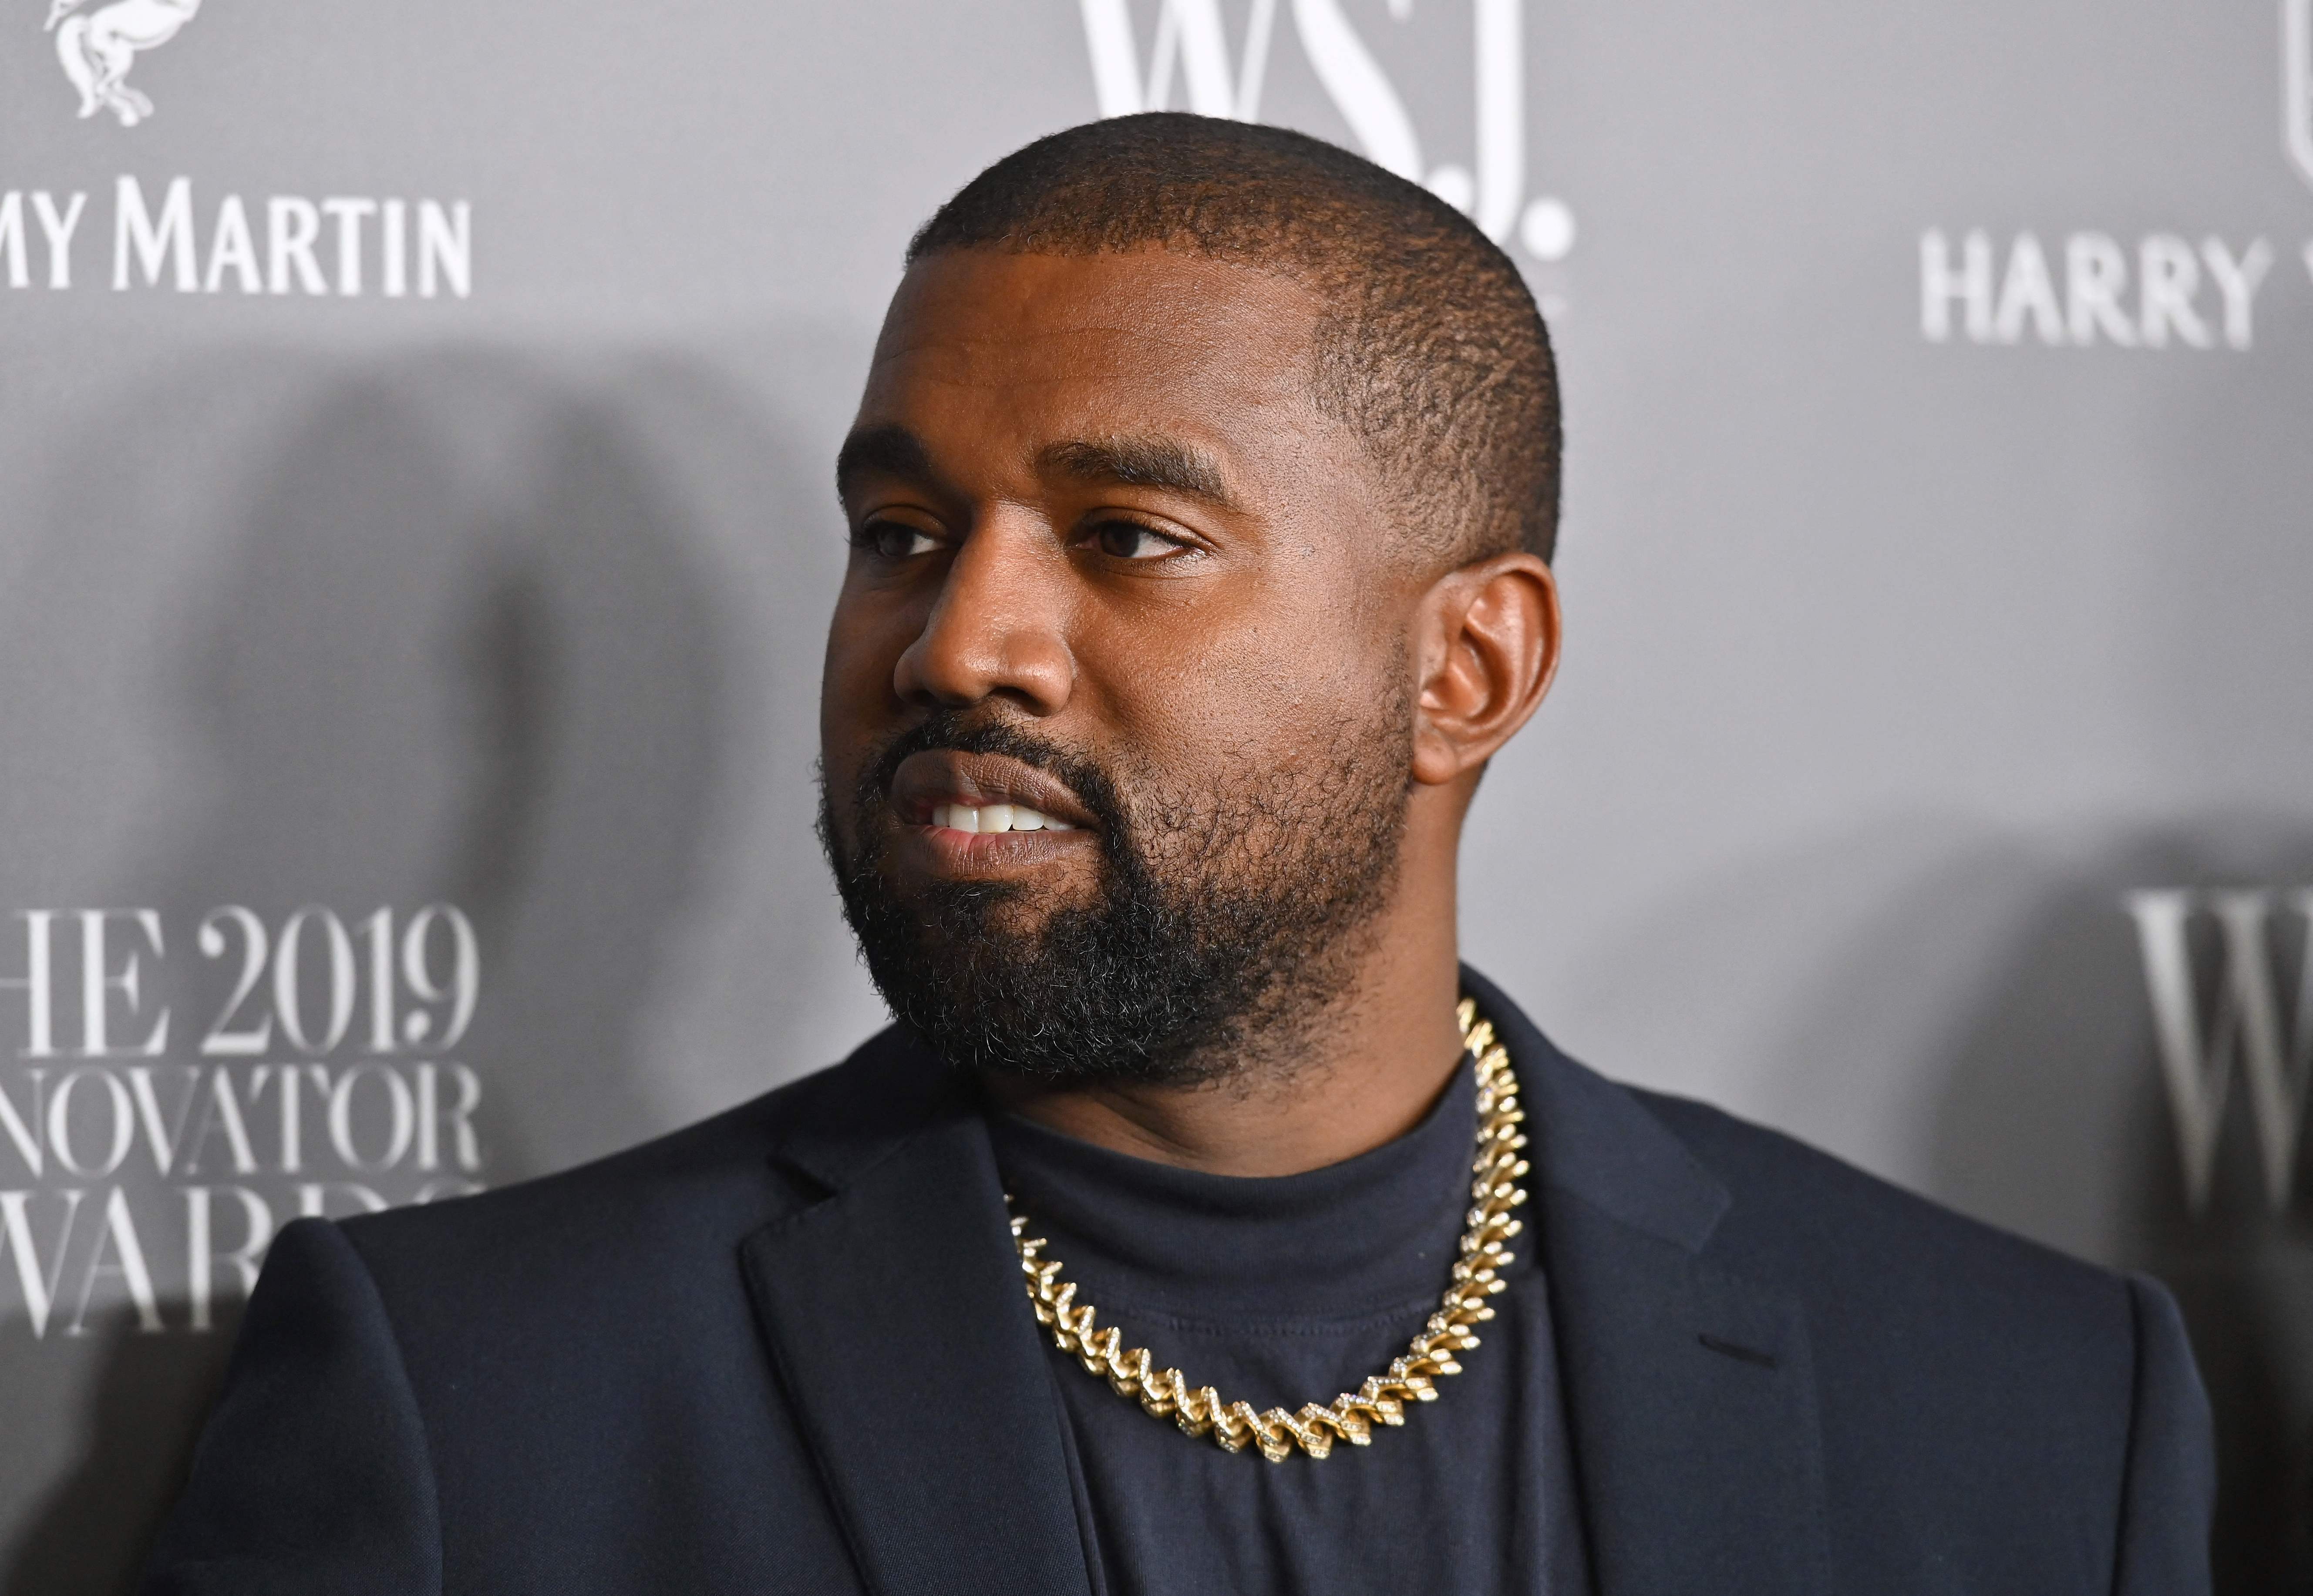 Kanye West, pictured in 2019, could face federal scrutiny over his campaign disclosure reports from his 2020 presidential bid, a watchdog group says.